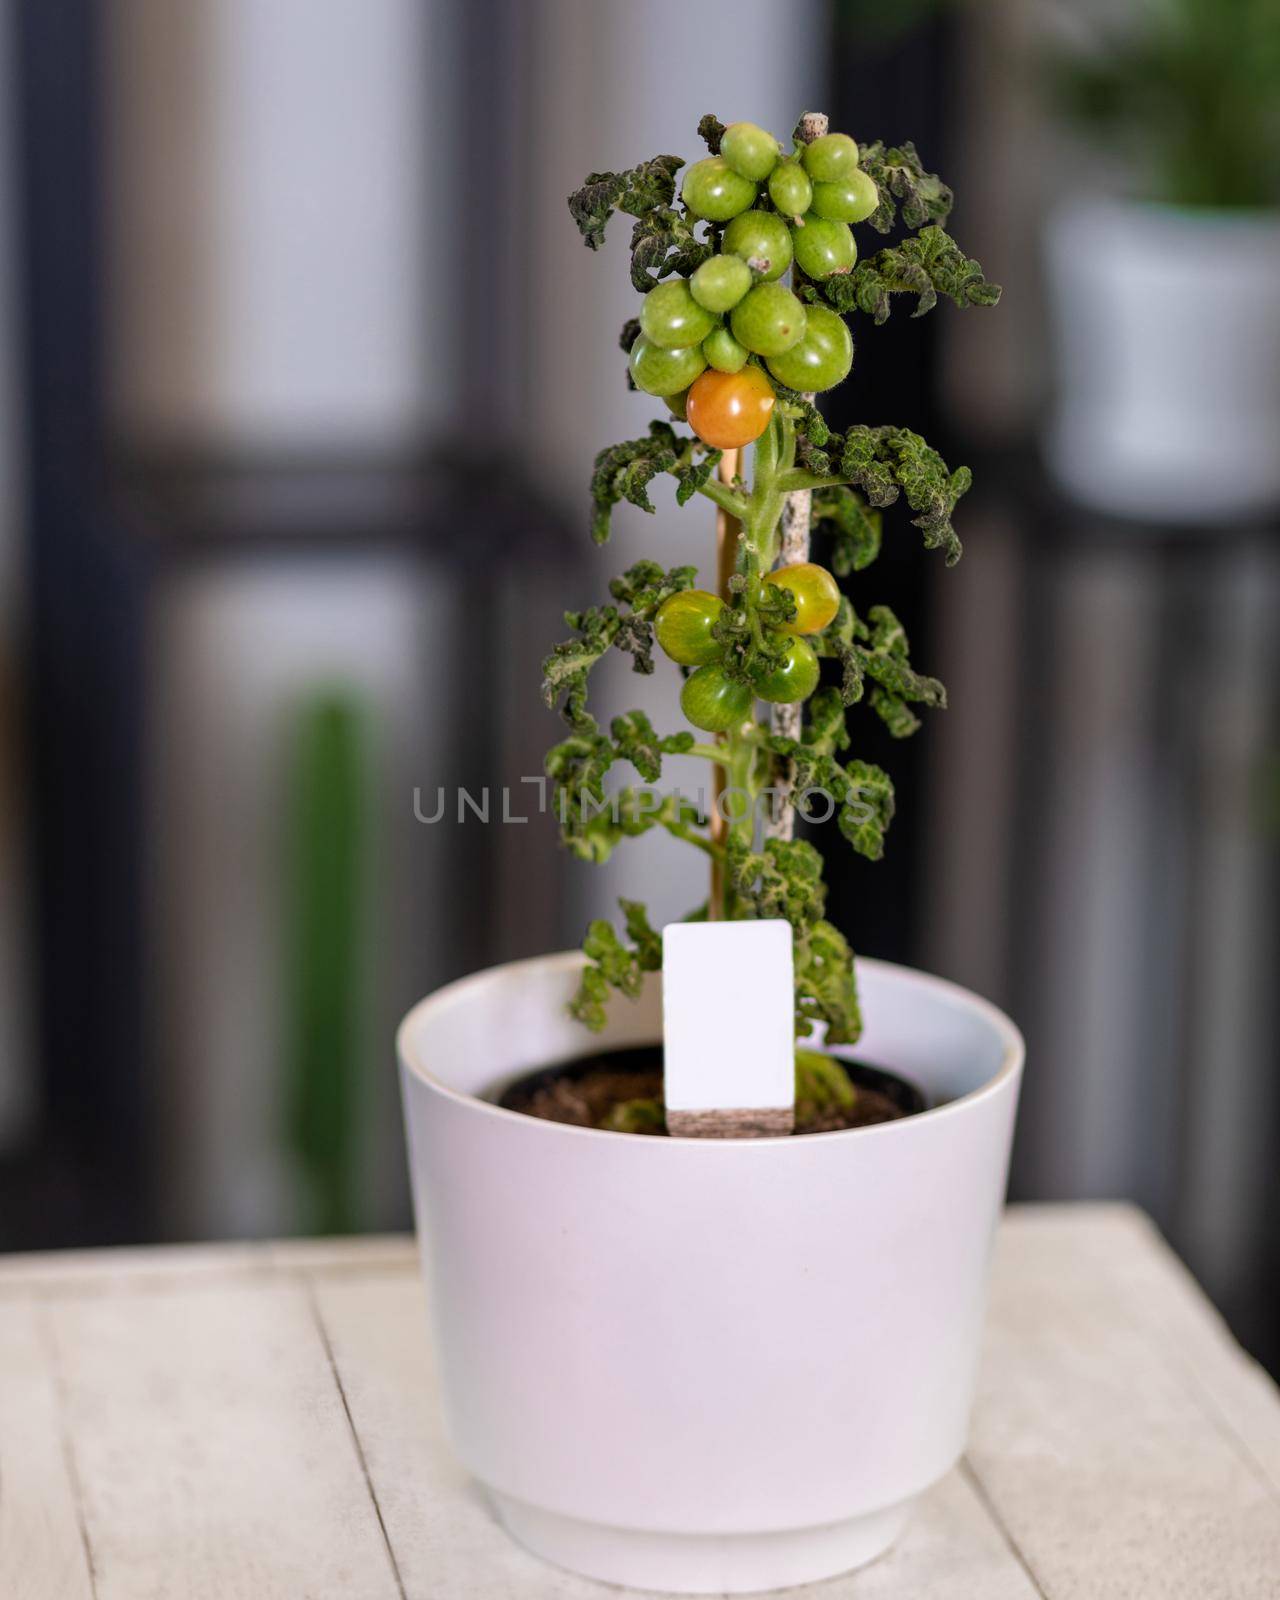 Natural Tomatoes plant in the white pot